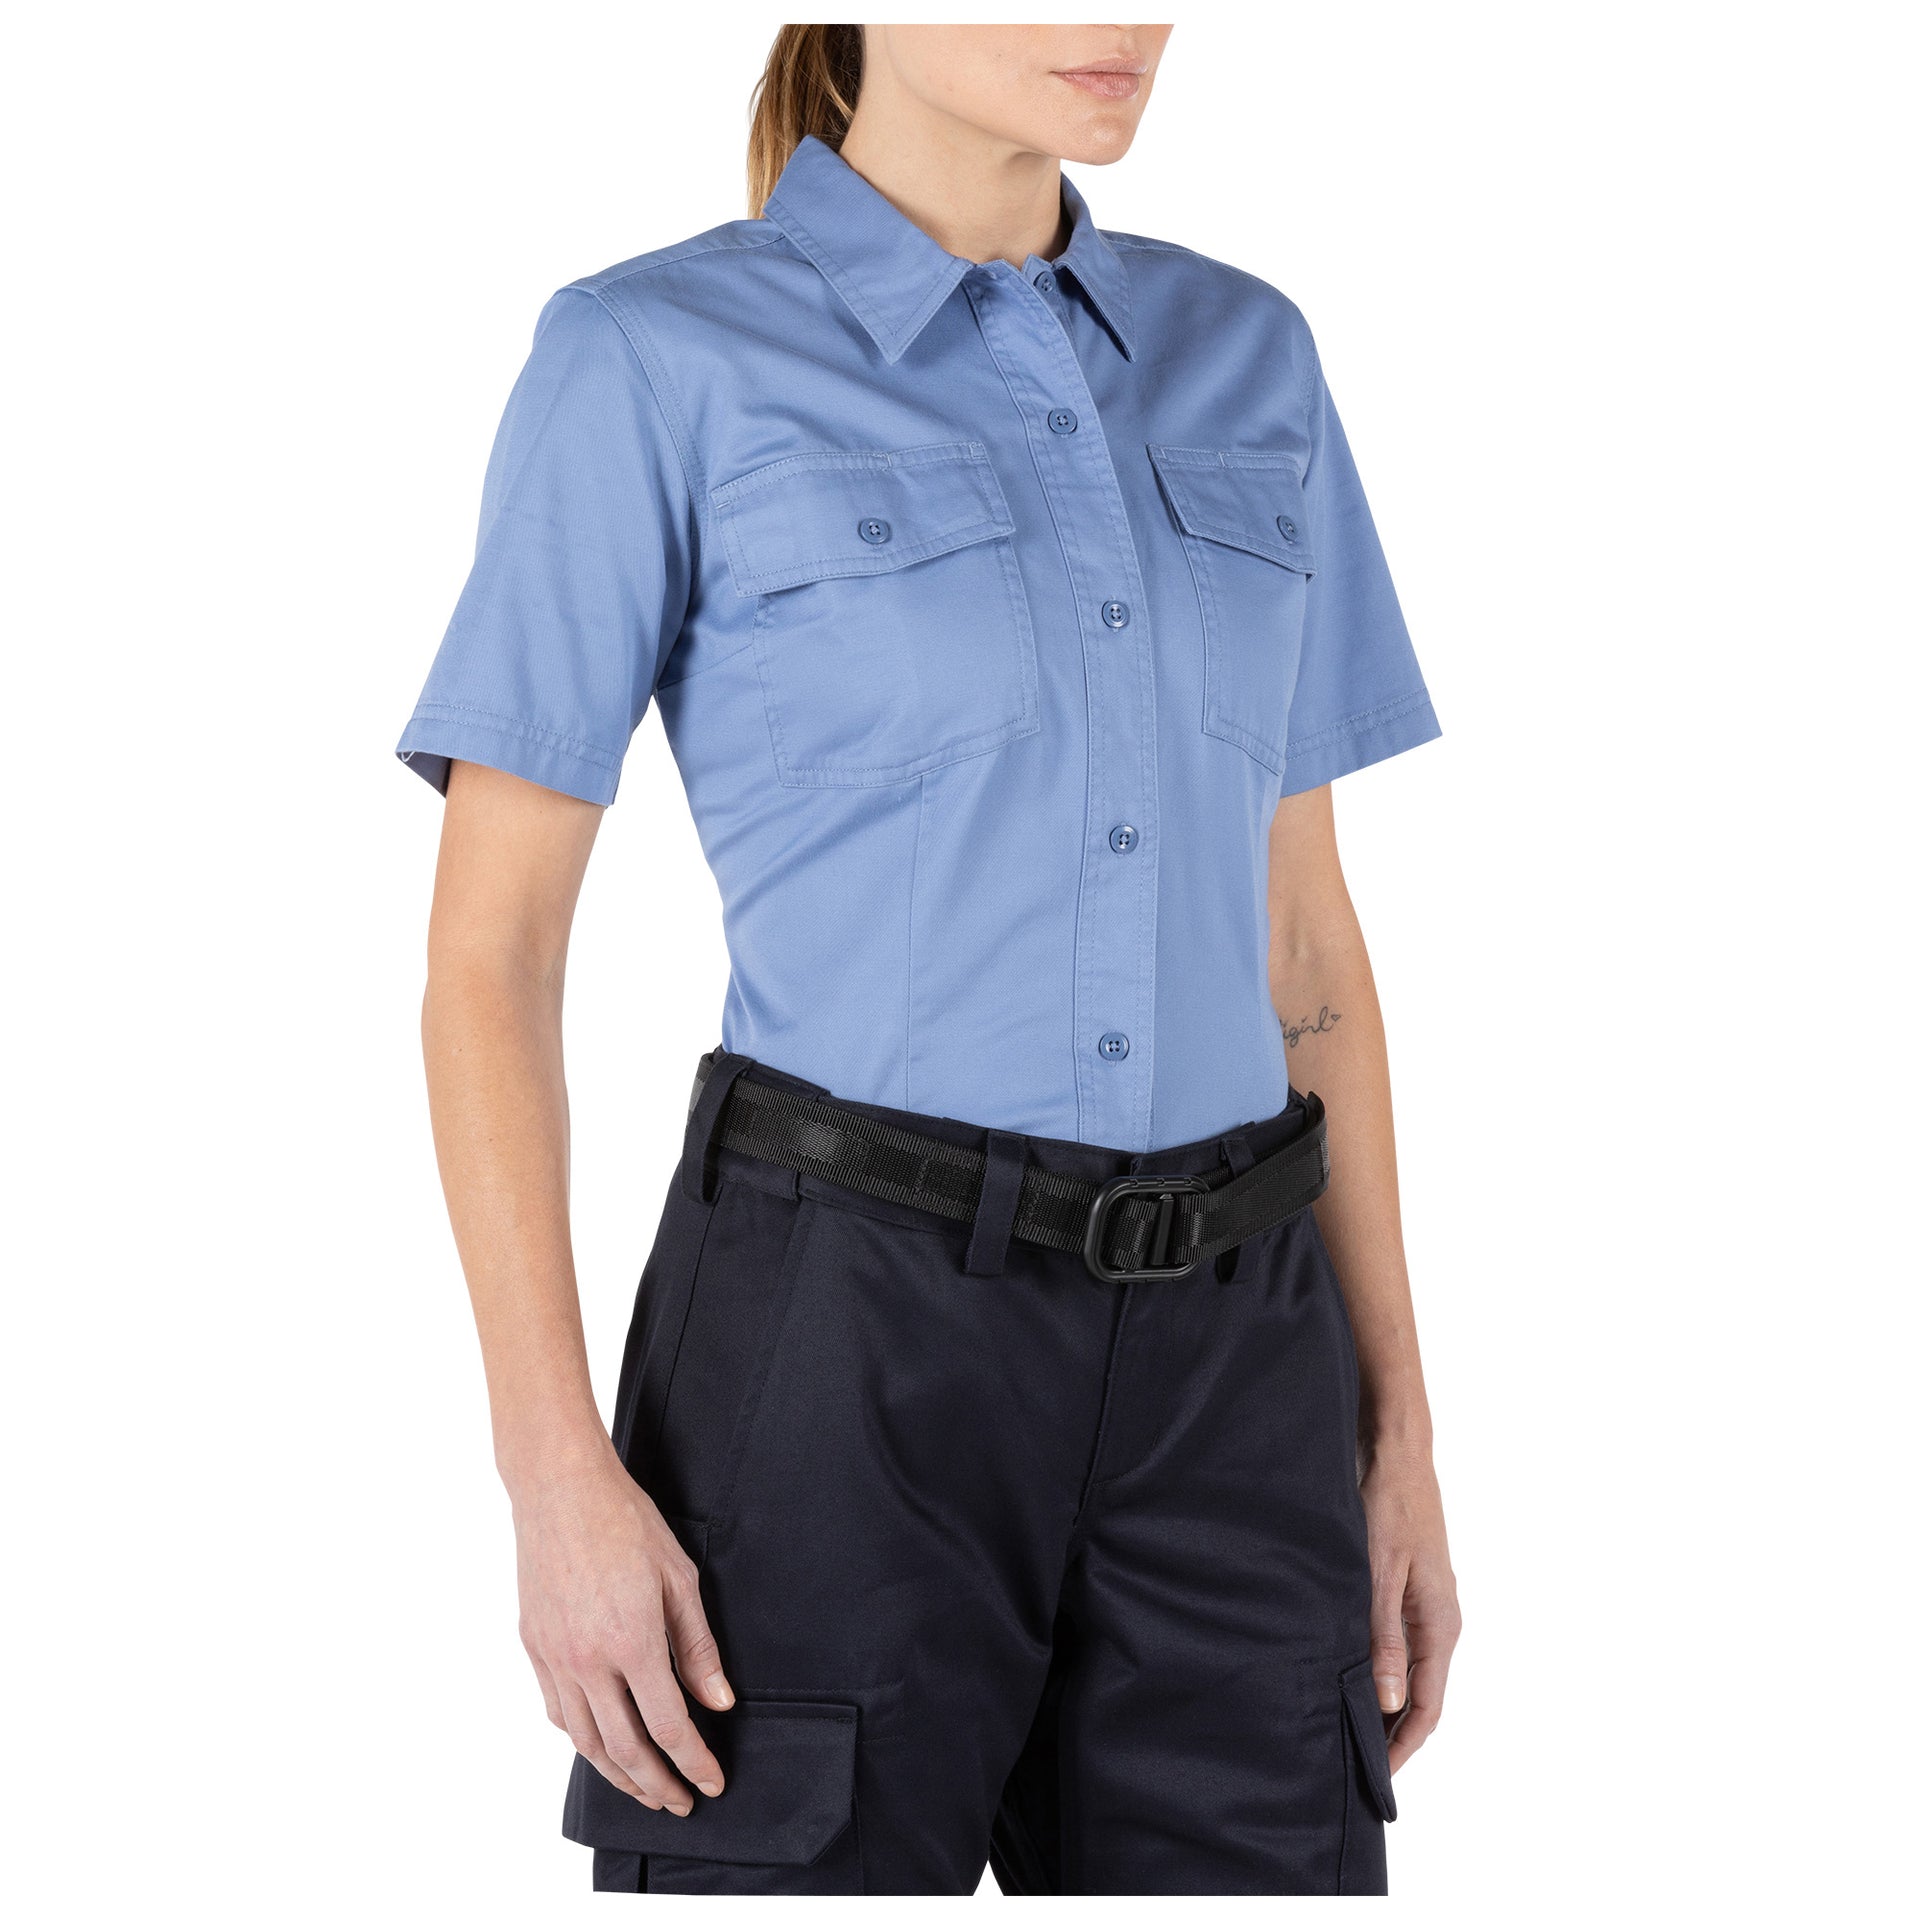 5.11 Tactical Women's Company Short Sleeve Shirt (61321) | The Fire Center | Fuego Fire Center | FIREFIGHTER GEAR | Ready to answer every call through a busy shift, the Company Shirt backs you with a vital layer of safety (certified to NFPA 1975, 2019 edition) in a high-tech, low maintenance fabric. It’s made with a soft, yet durable cotton twill